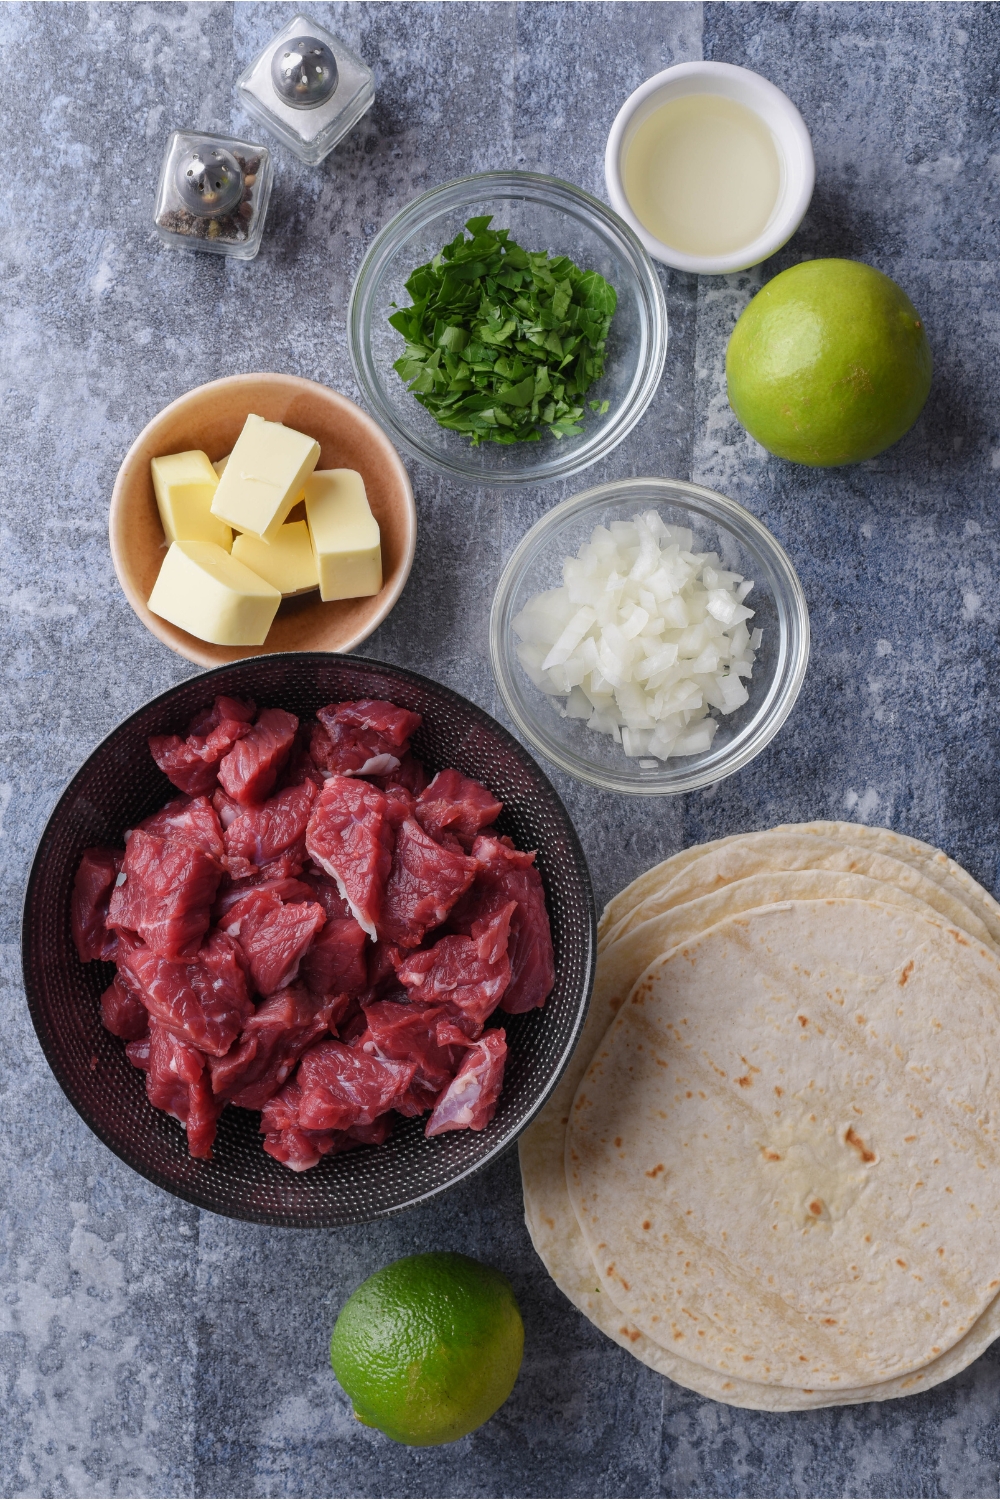 Overhead view of an assortment of ingredients including bowls of raw ground beef, diced onions, butter, chopped cilantro, and a stack of tortillas.